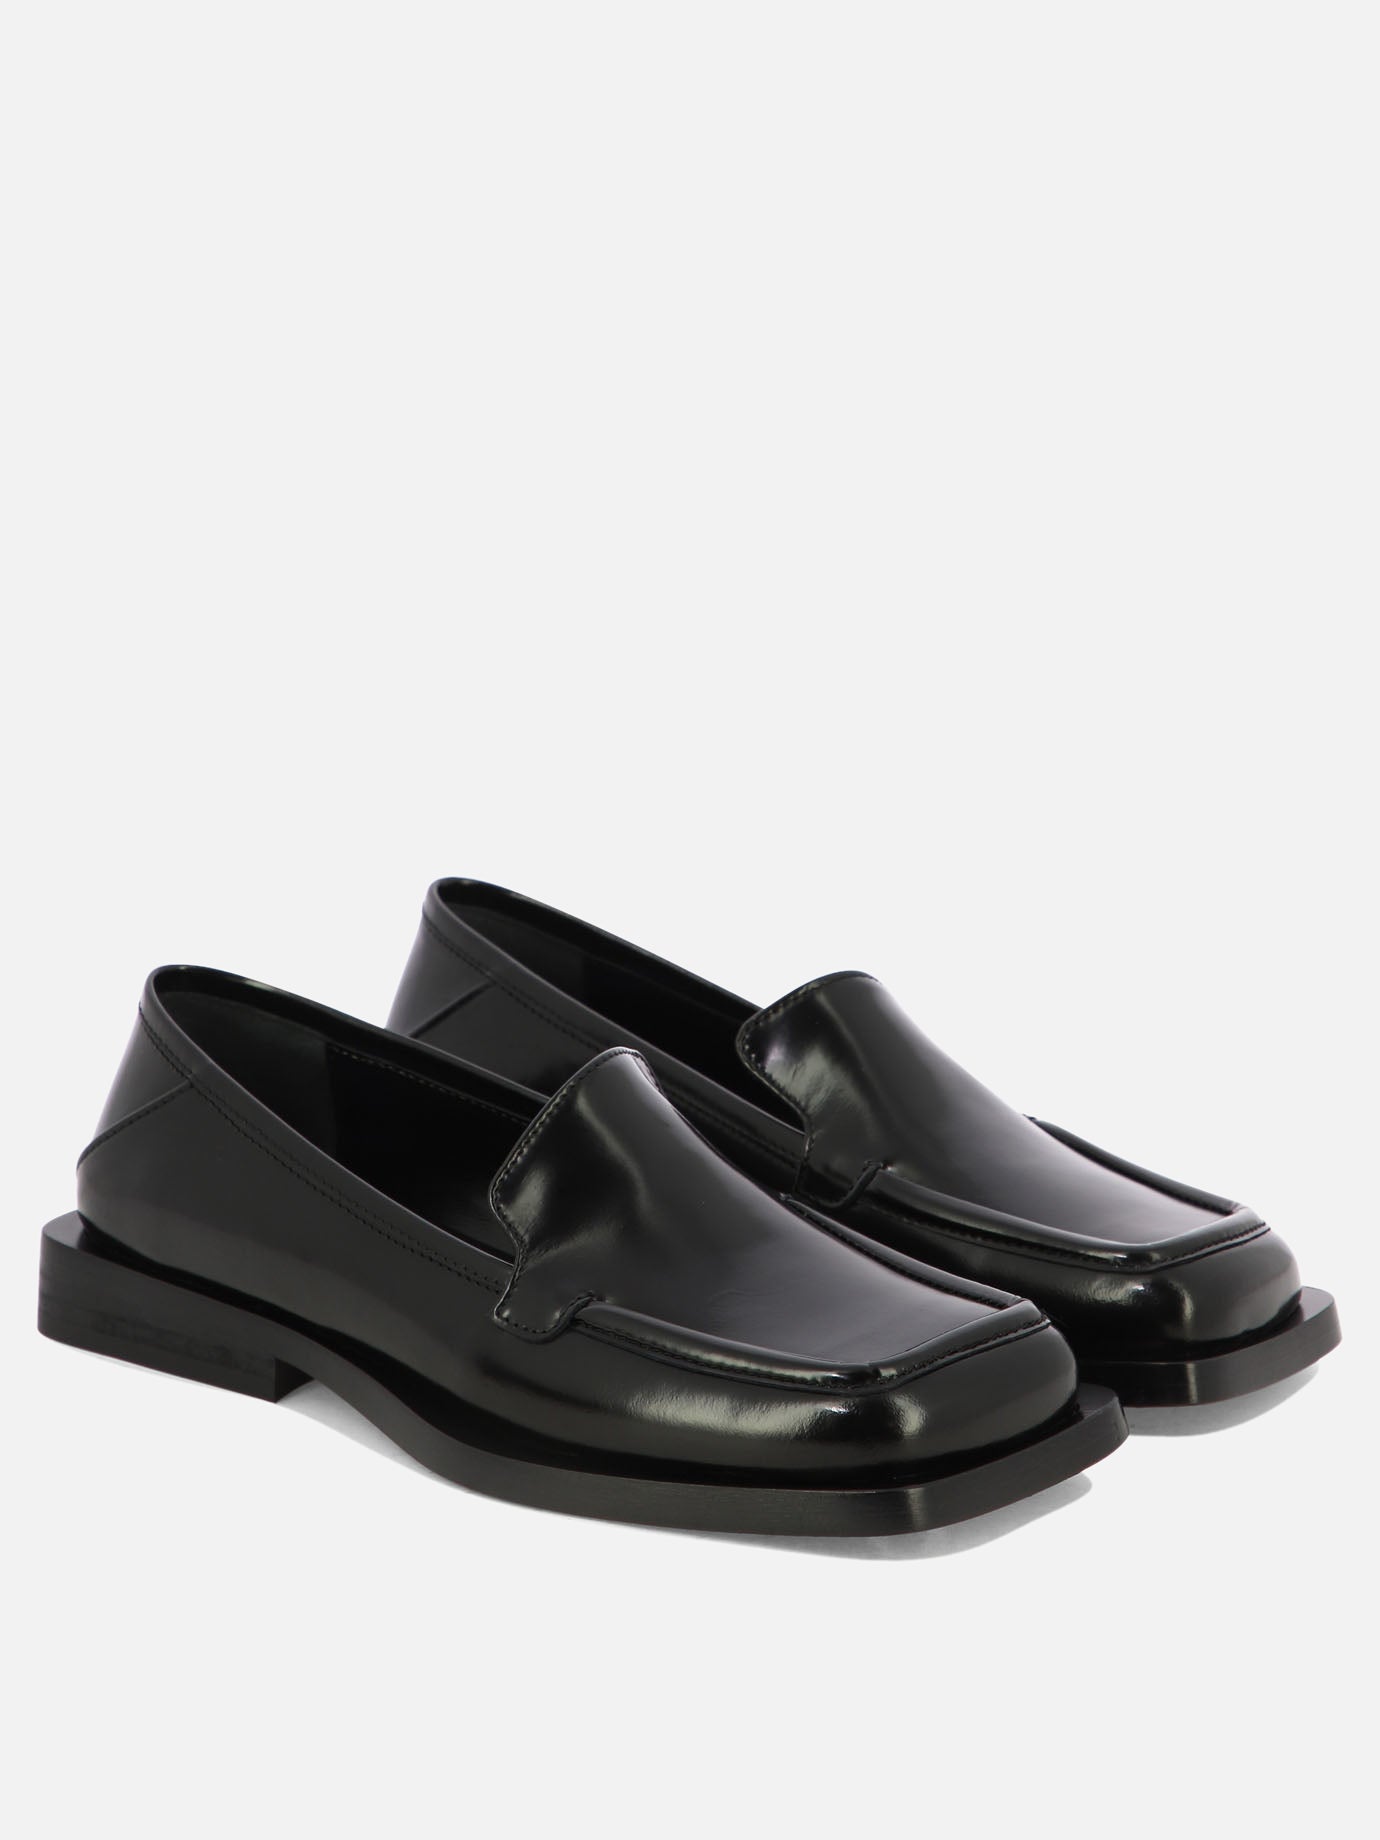 "Micol" loafers